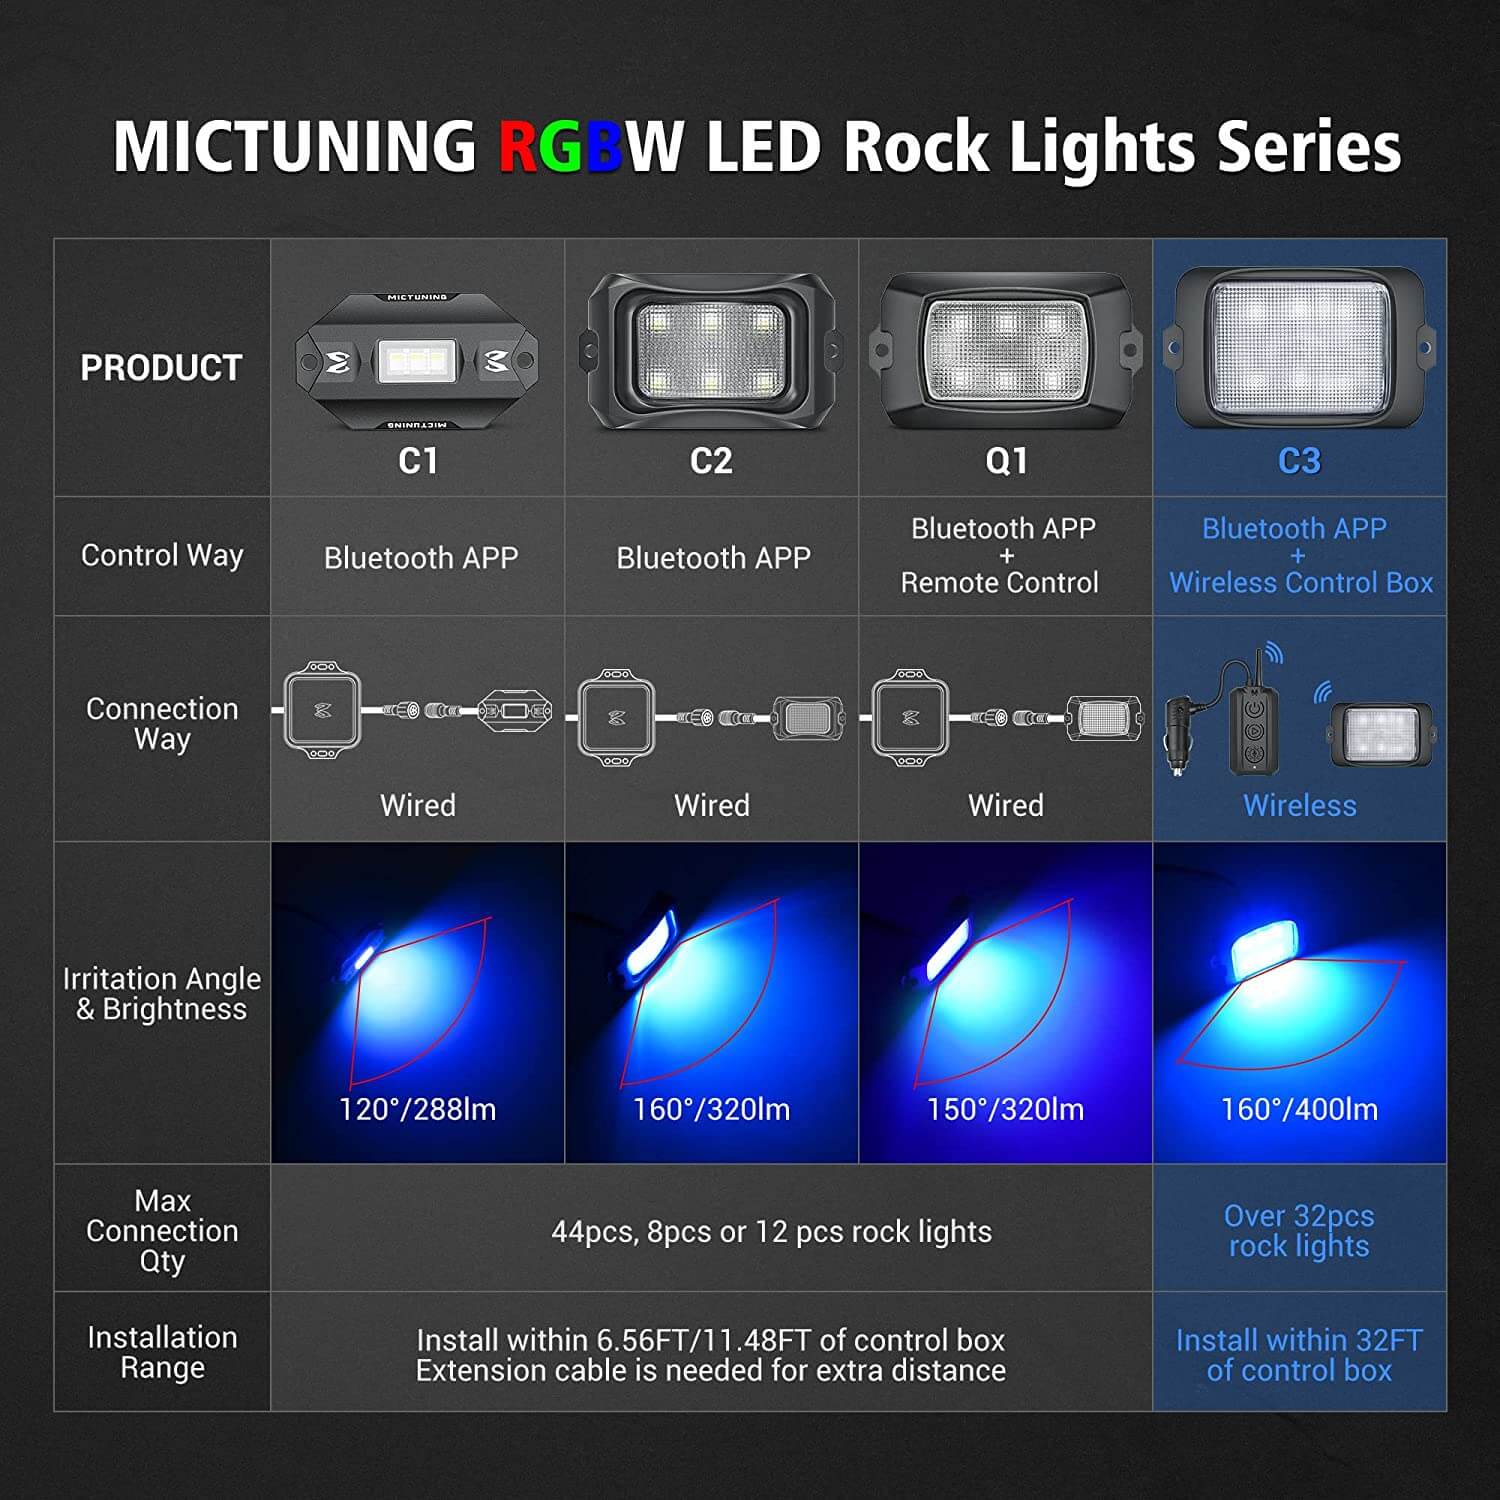 C3 Extensible RGBW LED Rock Lights - 28 Pods Wireless Control Multi-Color Neon Underglow Lights